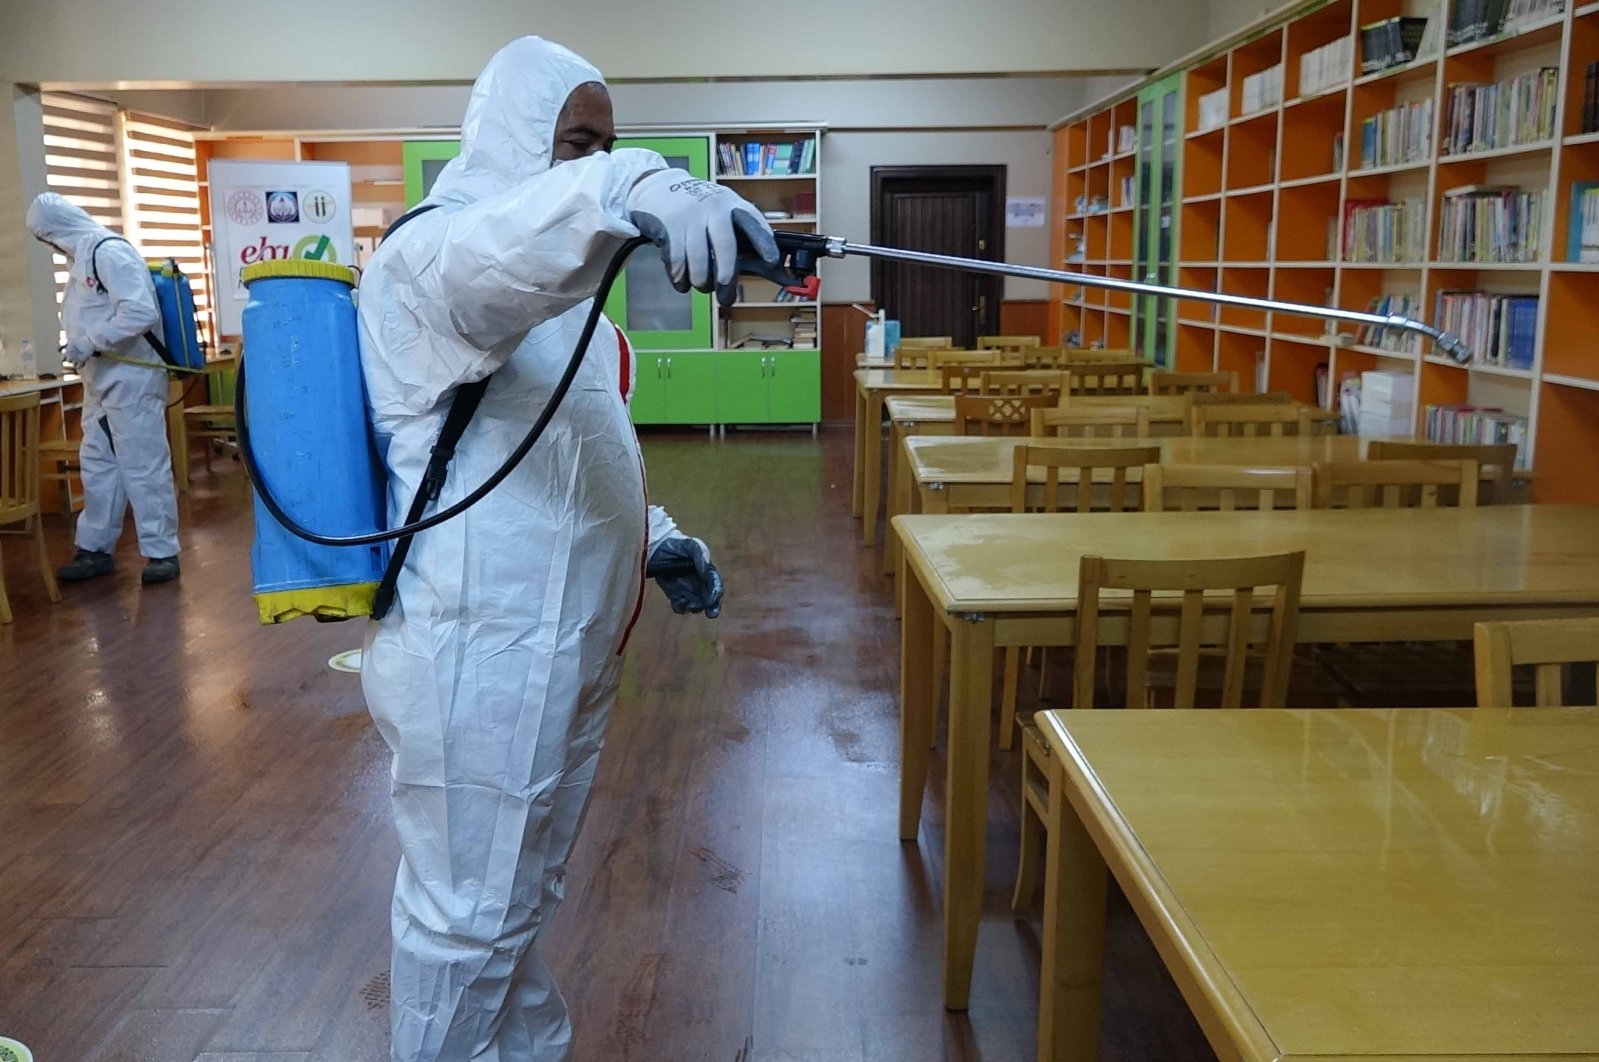 A man dressed in personal protective equiment (PPE) disinfects tables and bookshelves at a school in Adana province, southern Turkey, Sept. 3, 2020. (IHA Photo)